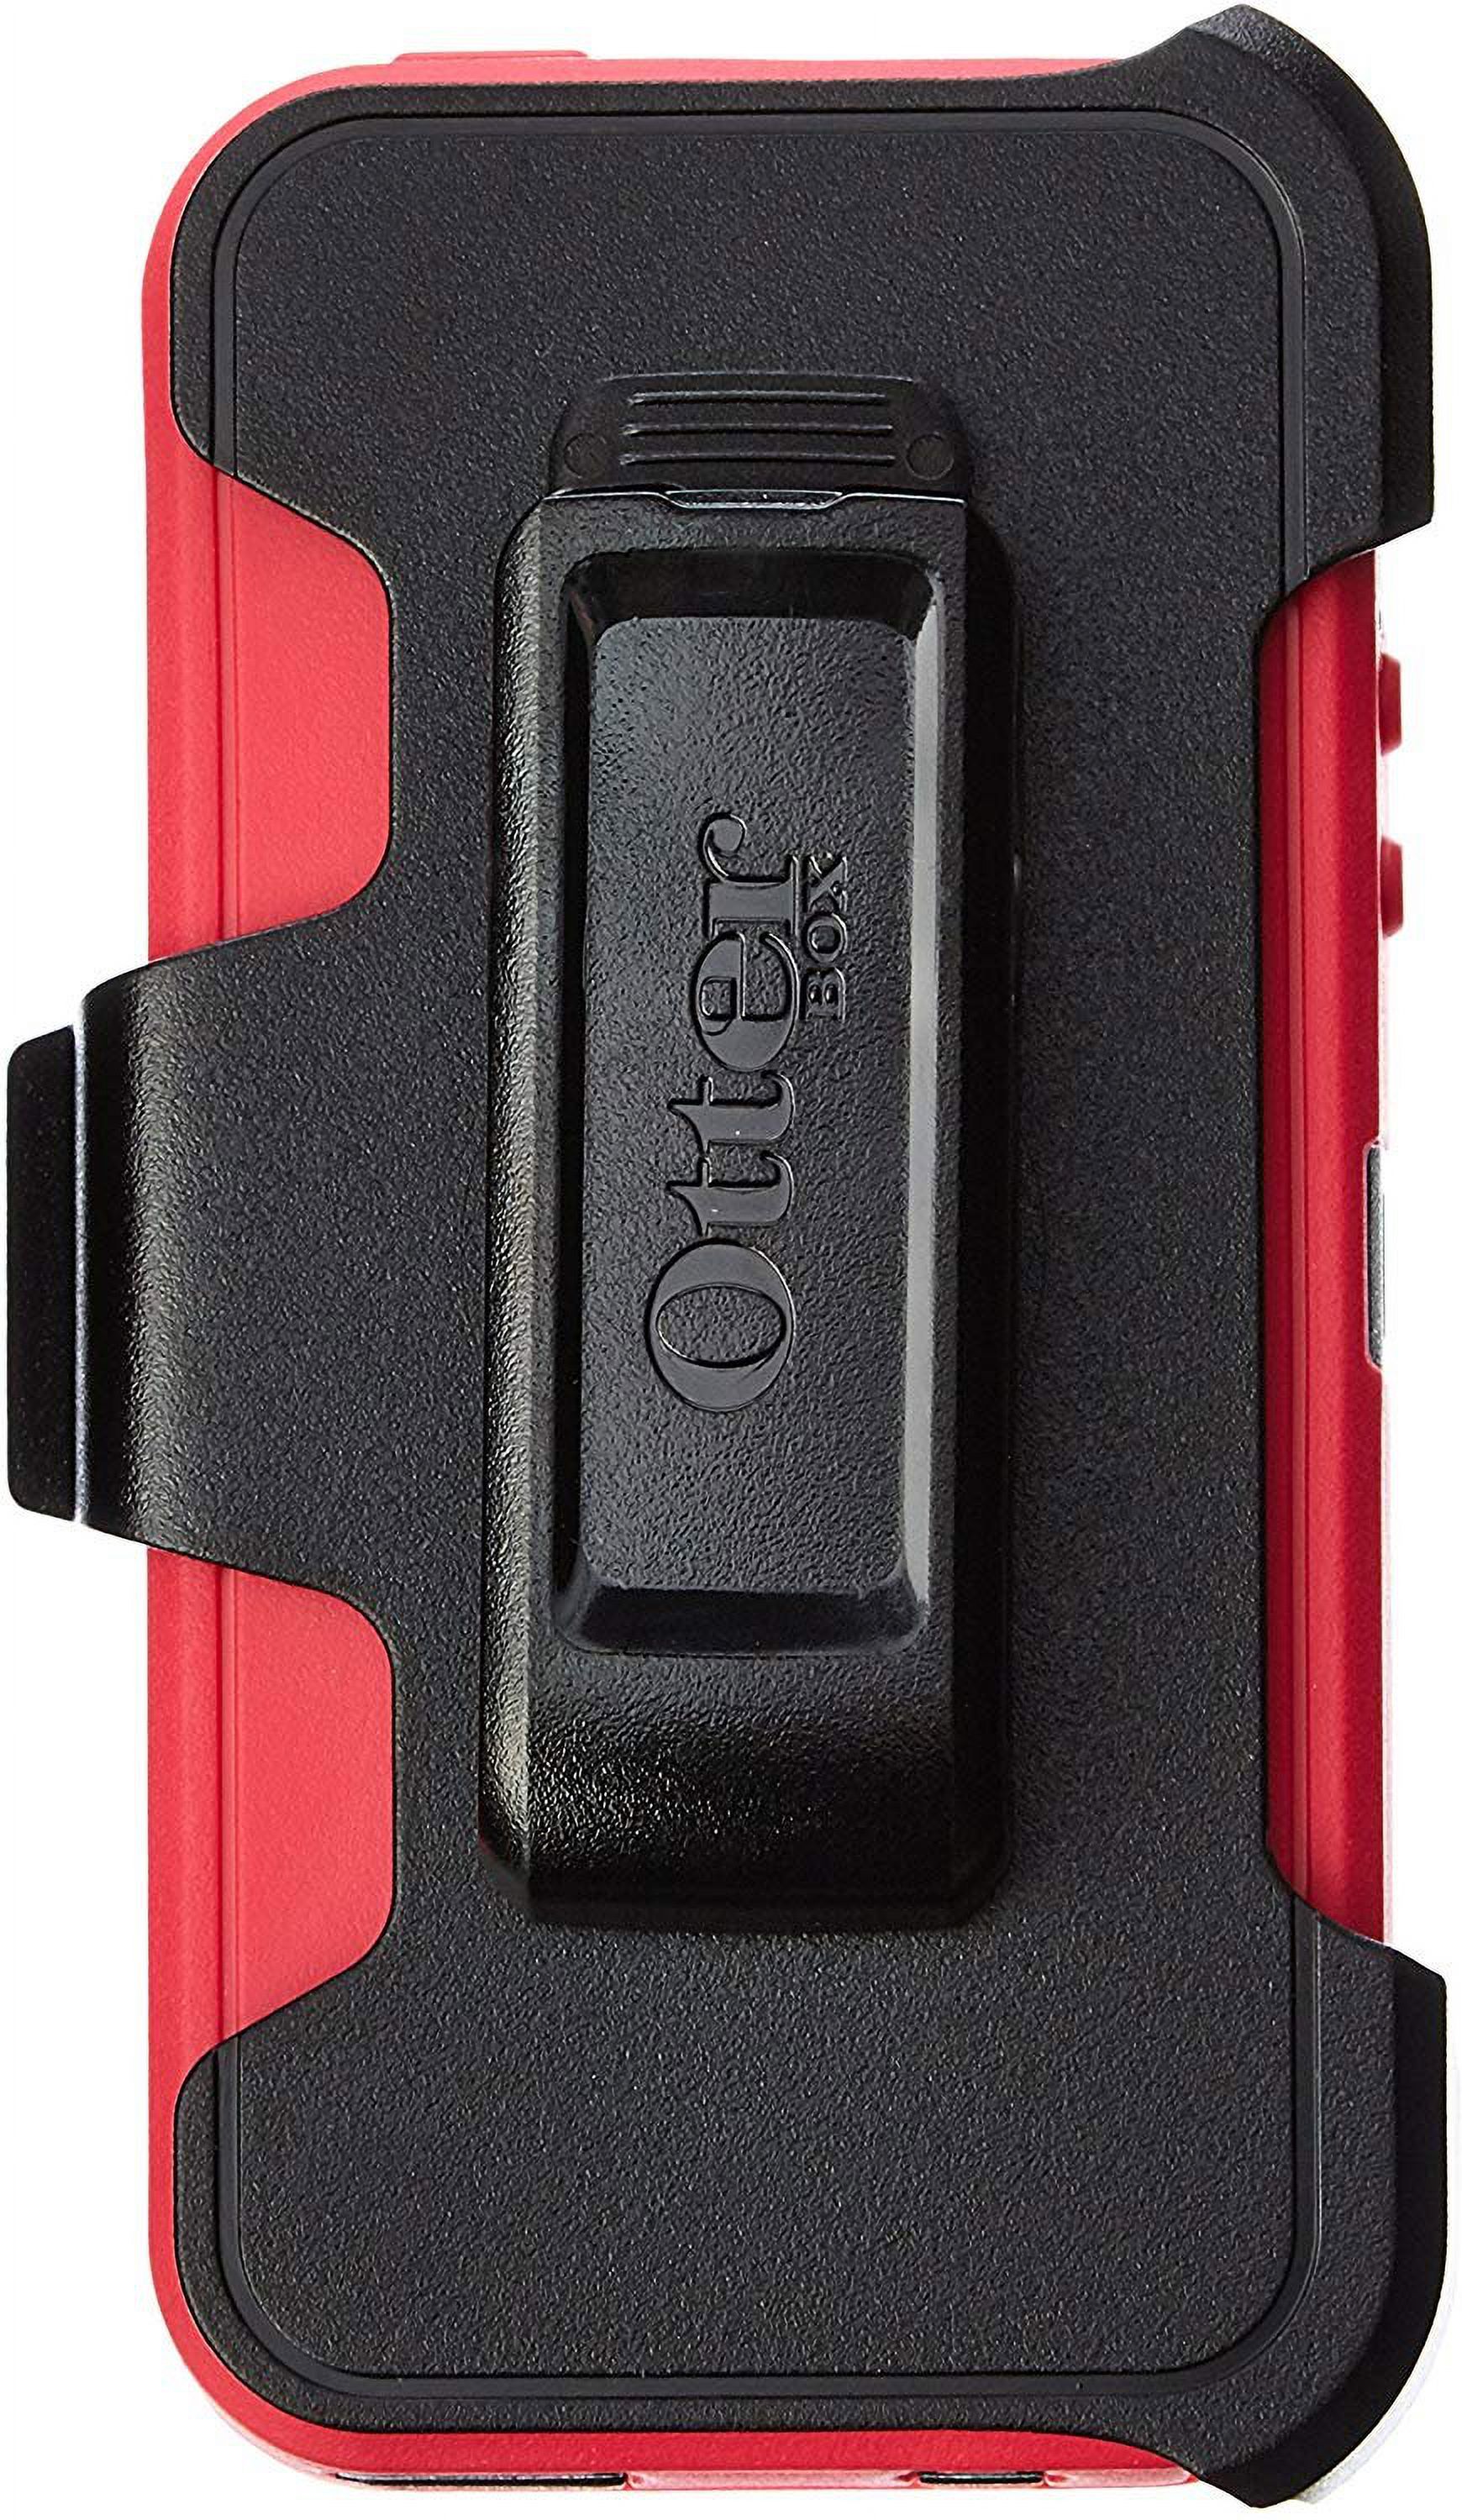 OtterBox Defender Carrying Case (Holster) Apple iPhone 5, iPhone 5s Smartphone, Raspberry - image 2 of 2